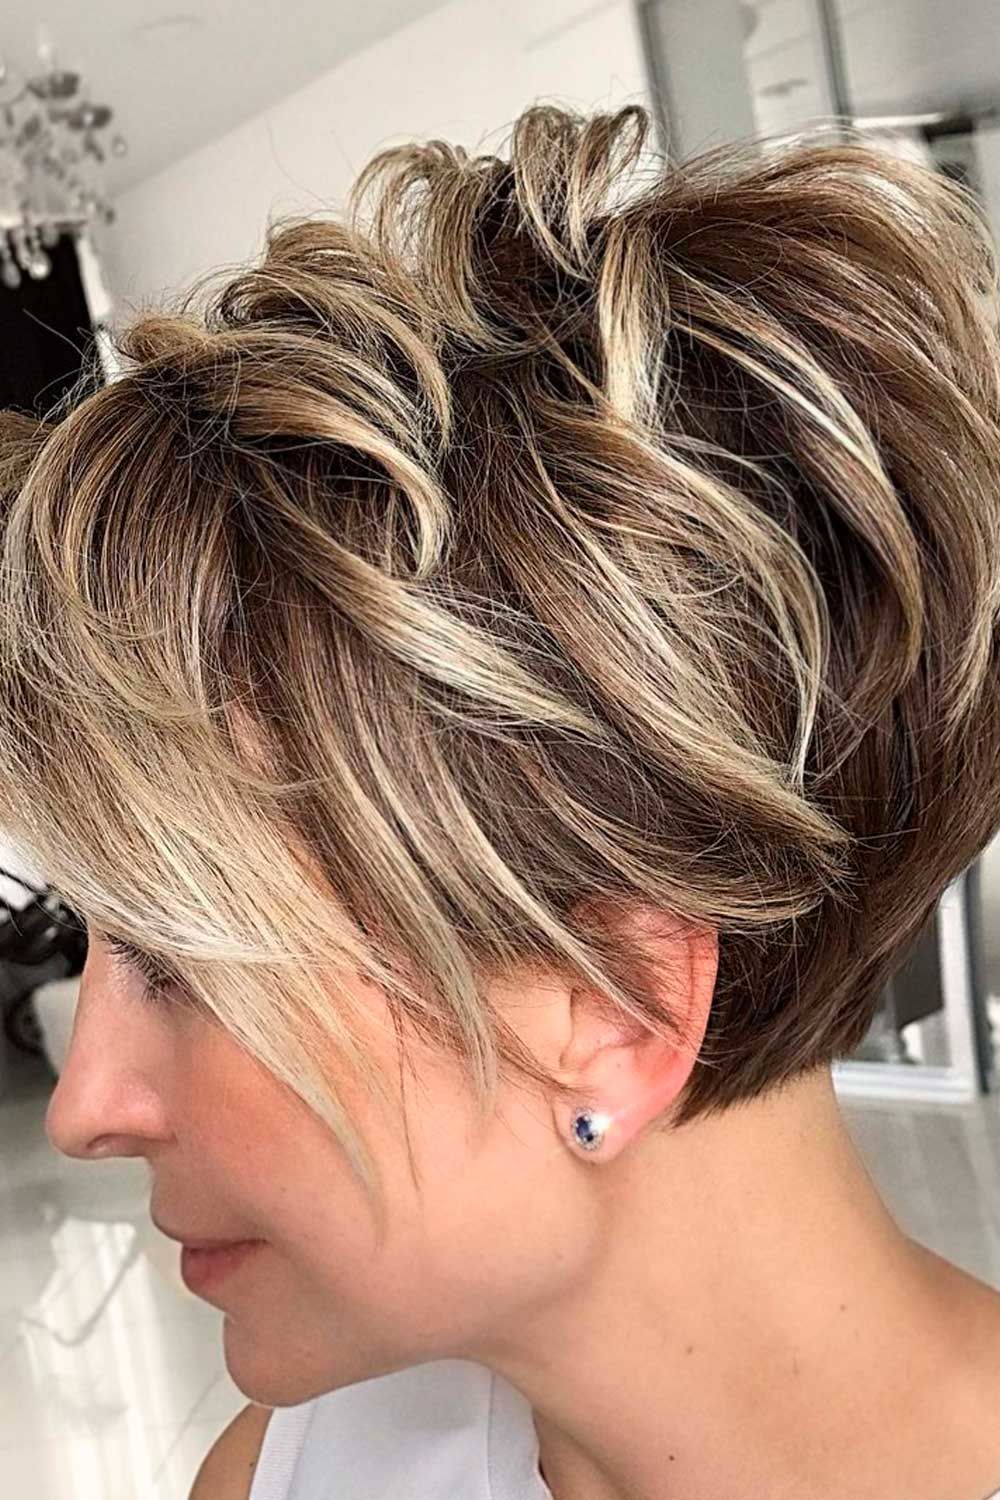 Short Hairstyles for Heart face 29 Heart shape face hairstyle female | Heart shaped face hairstyles female | Short Hairstyles for Heart Face Short Hairstyles for Heart Face Women